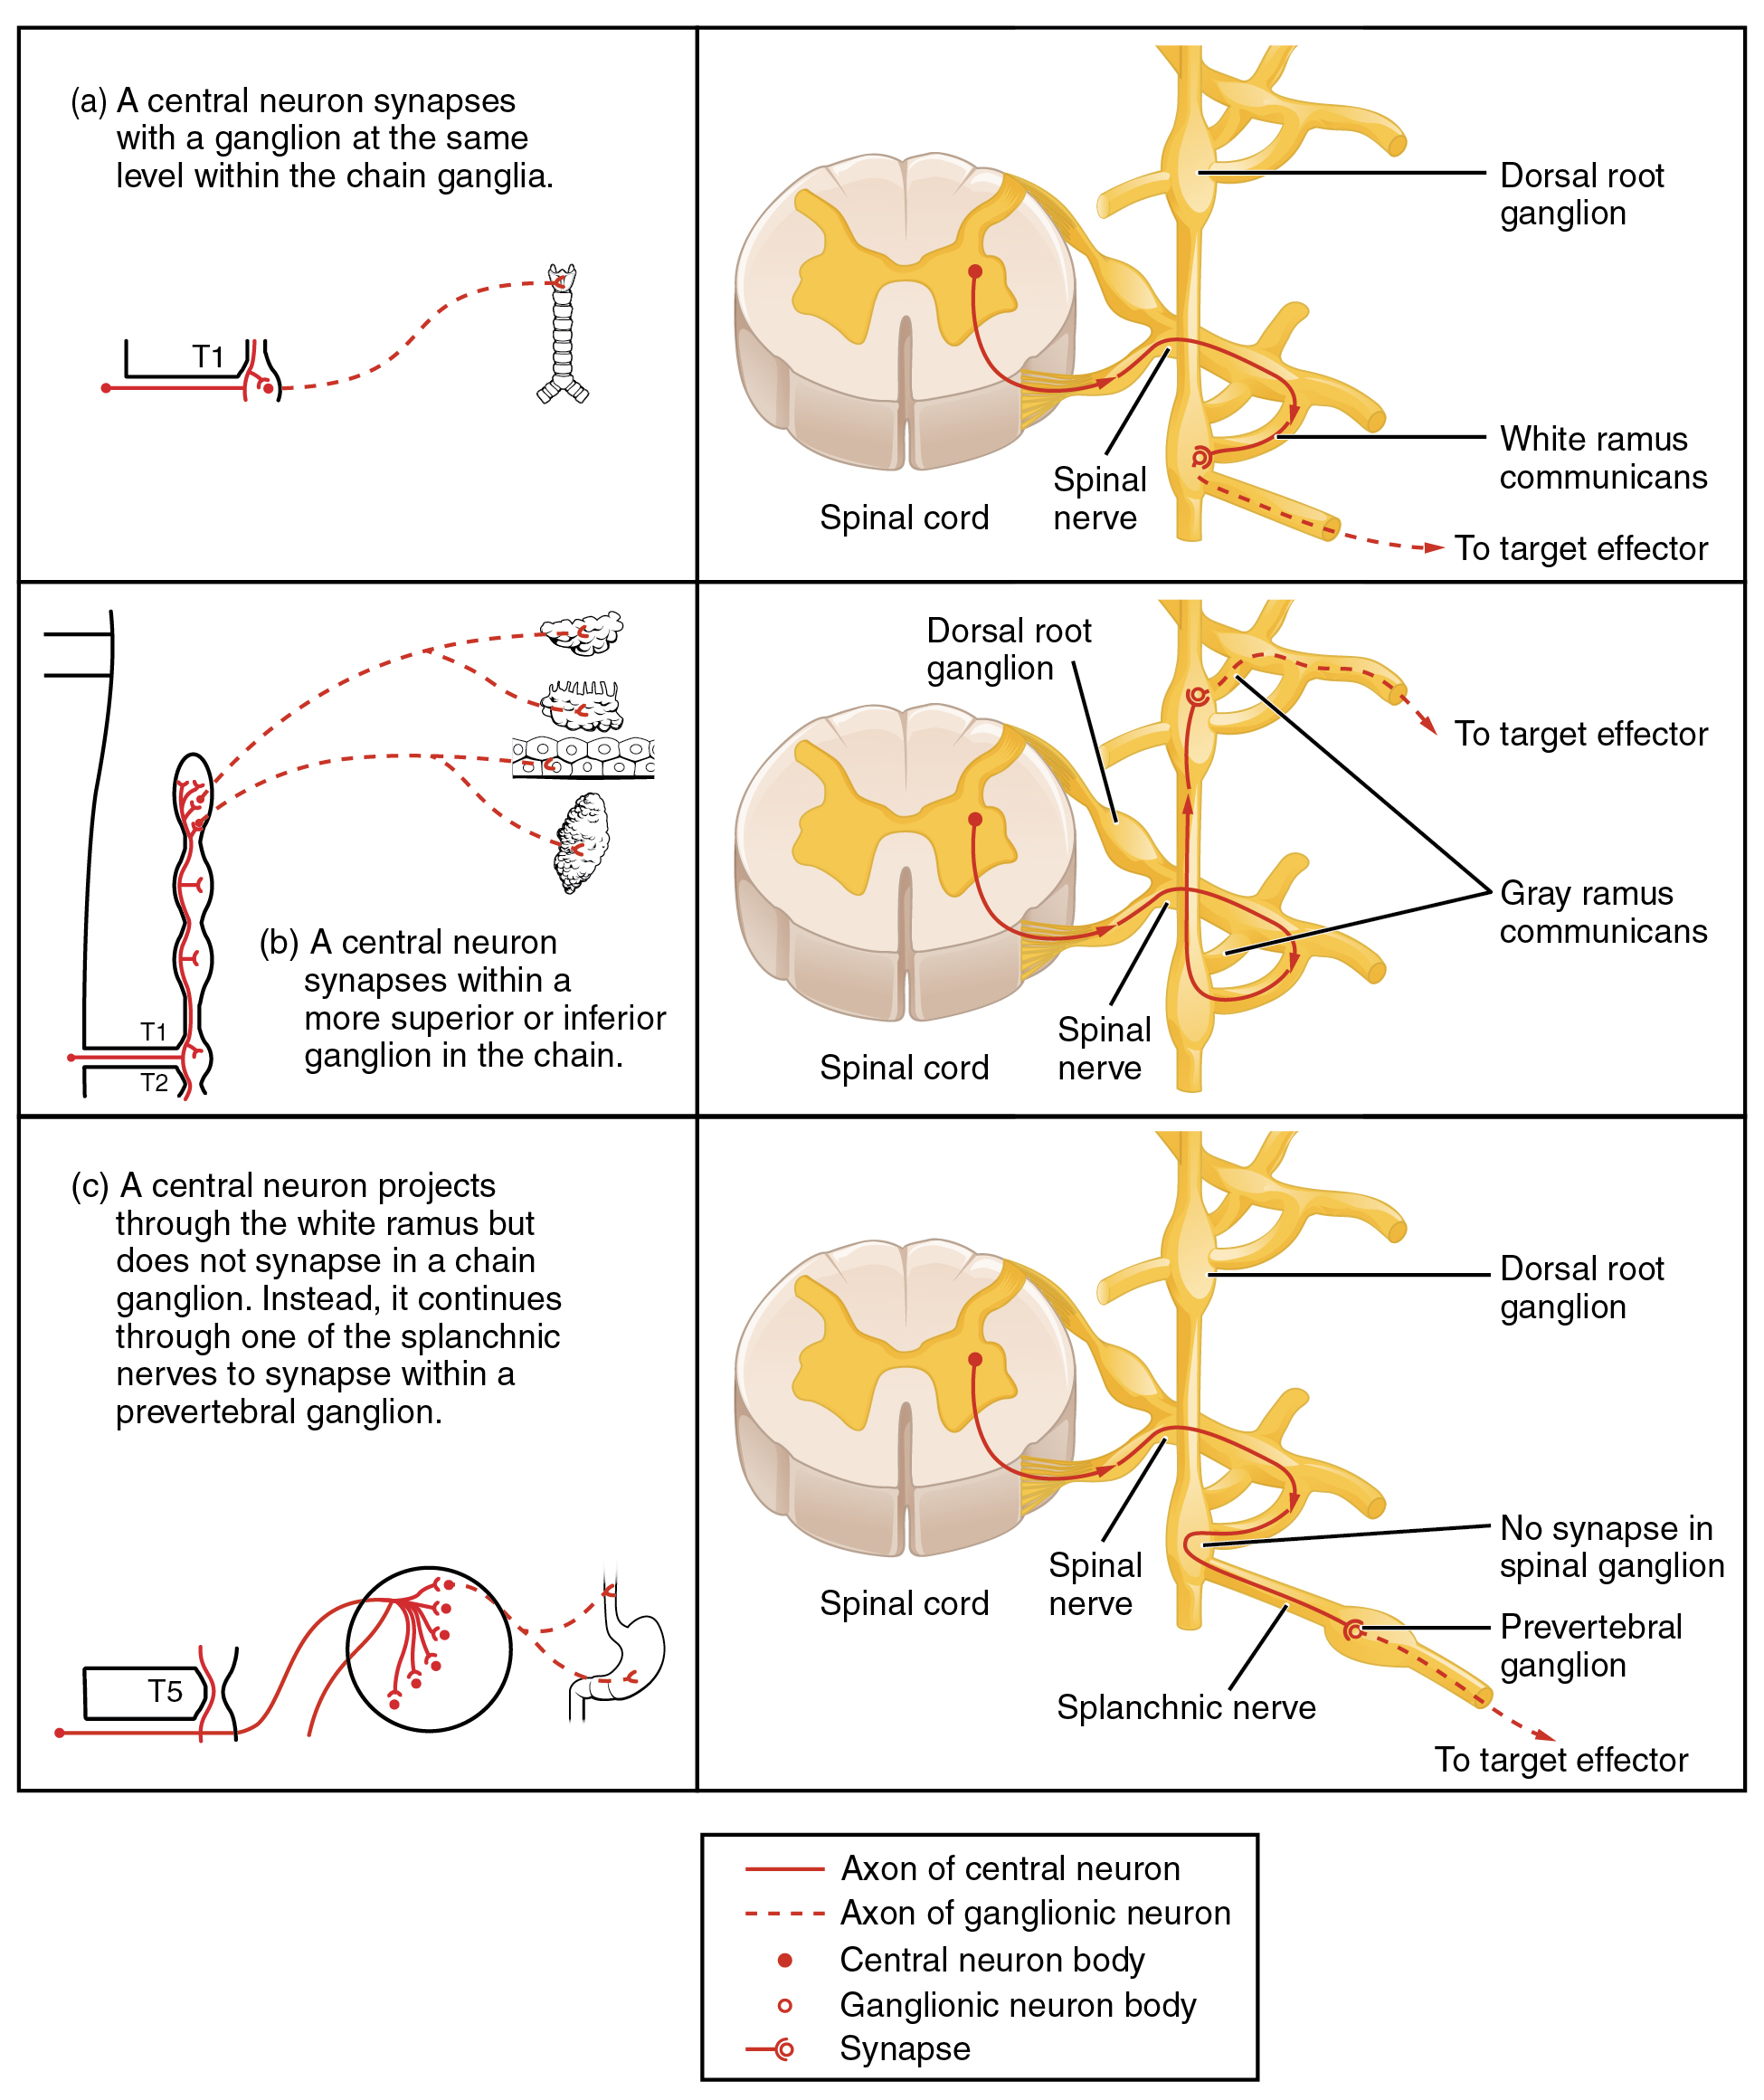 This table shows the connections between the spinal cord and the